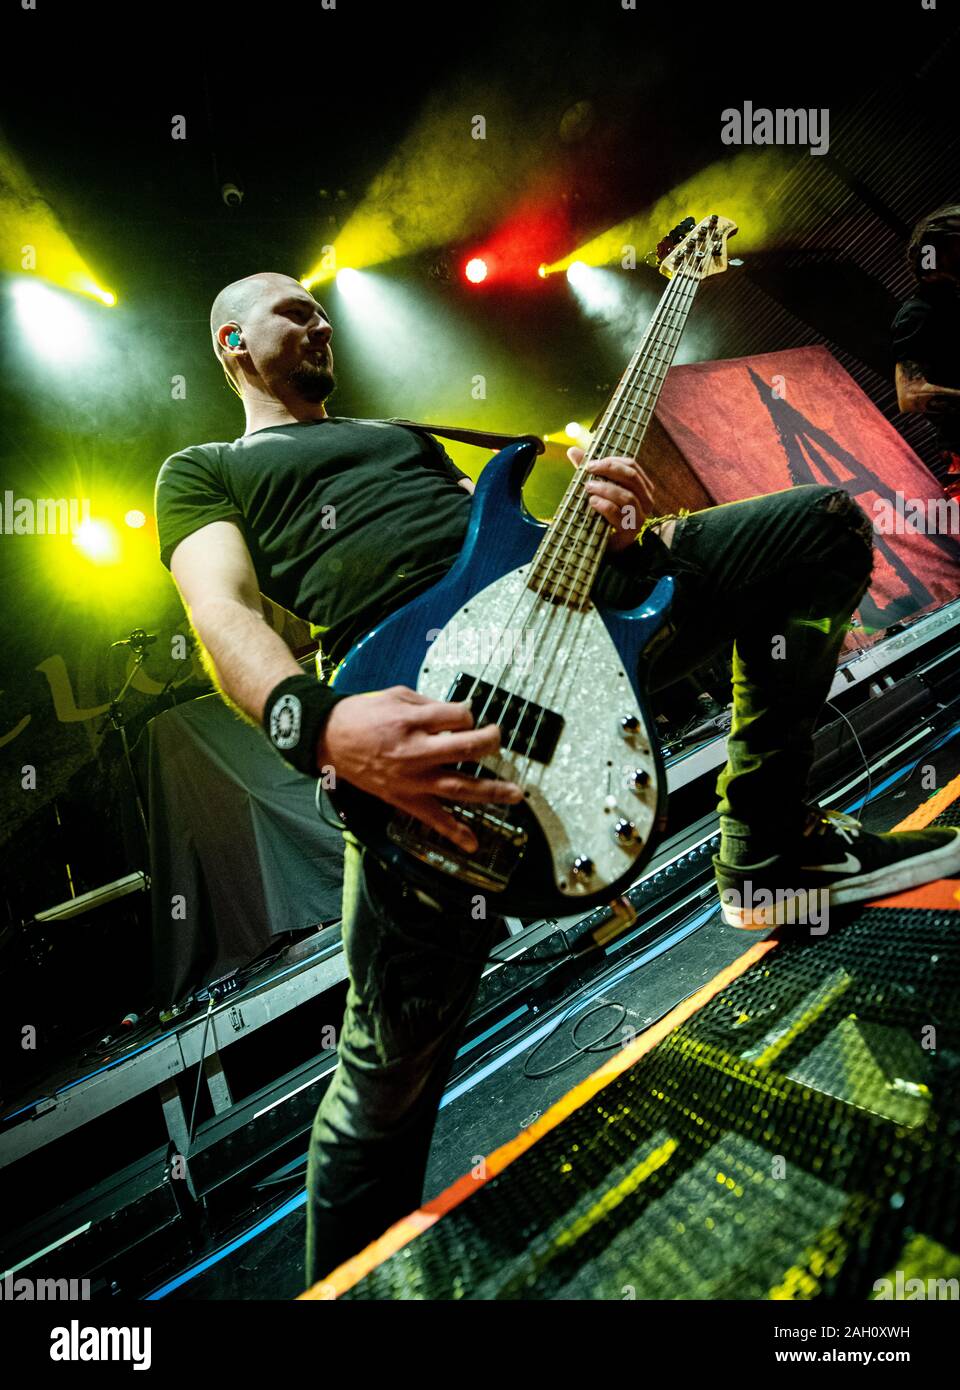 Copenhagen, Denmark. 20th, December 2019. The Moldovan nu metal band Infected  Rain performs a live concert at Amager Bio in Copenhagen. Here bass player  Vladimir Babici is seen live on stage. (Photo